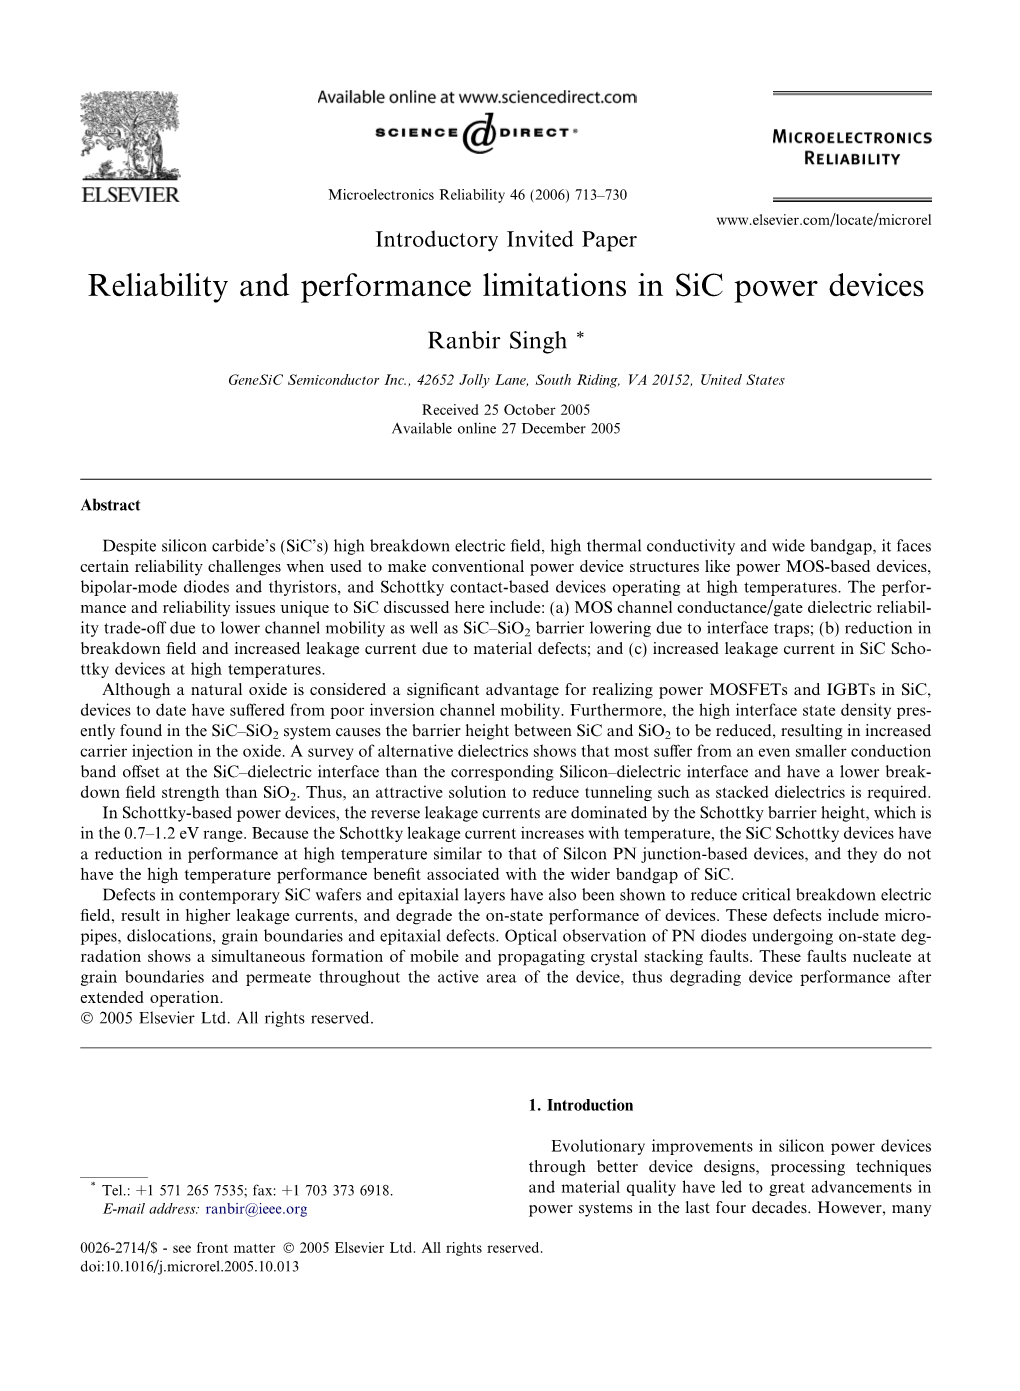 Reliability and Performance Limitations in Sic Power Devices